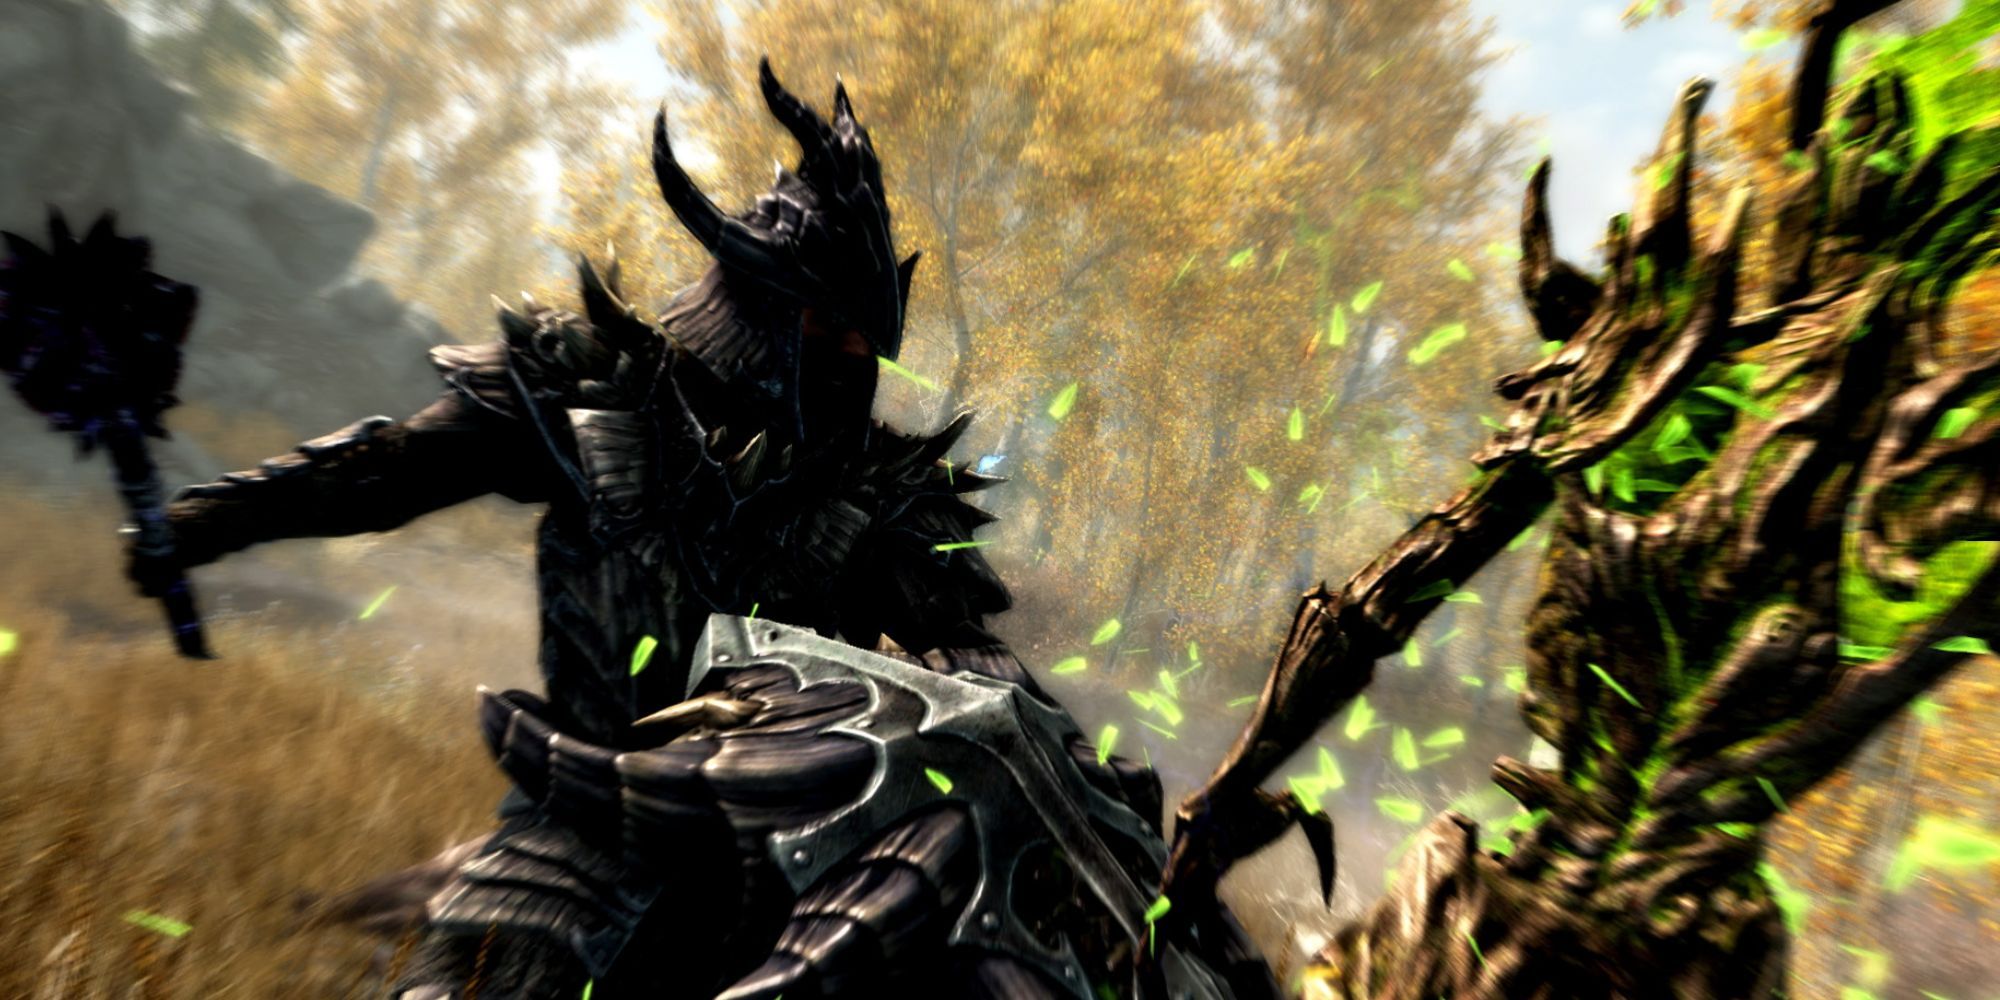 Two characters fighting in Skyrim